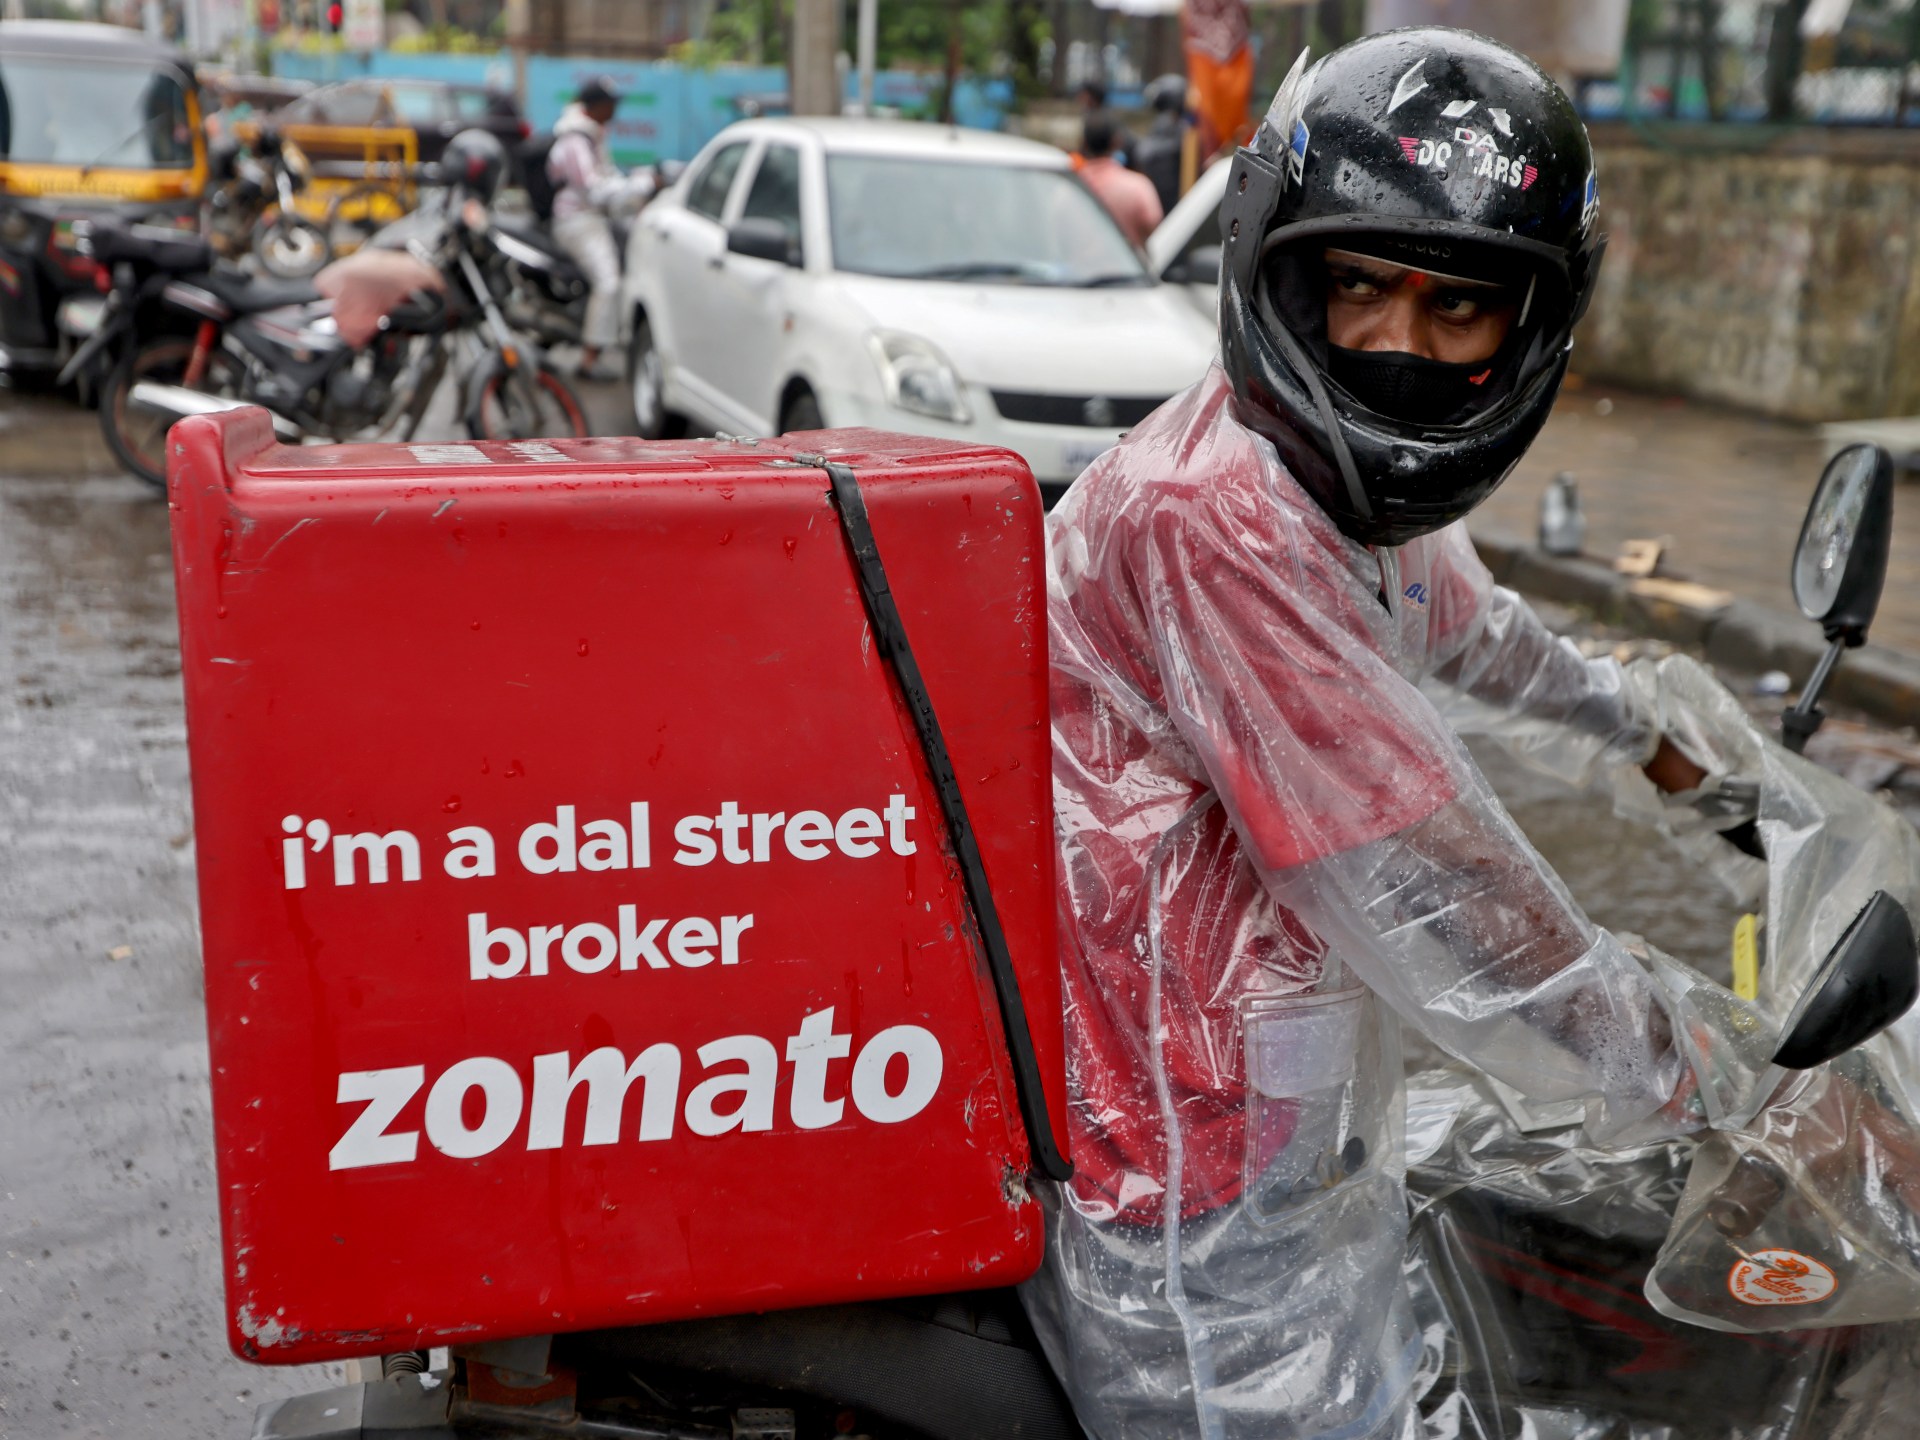 ‘Pure veg fleet’: How Indian food app Zomato sparked a caste, purity debate | Workers’ Rights News